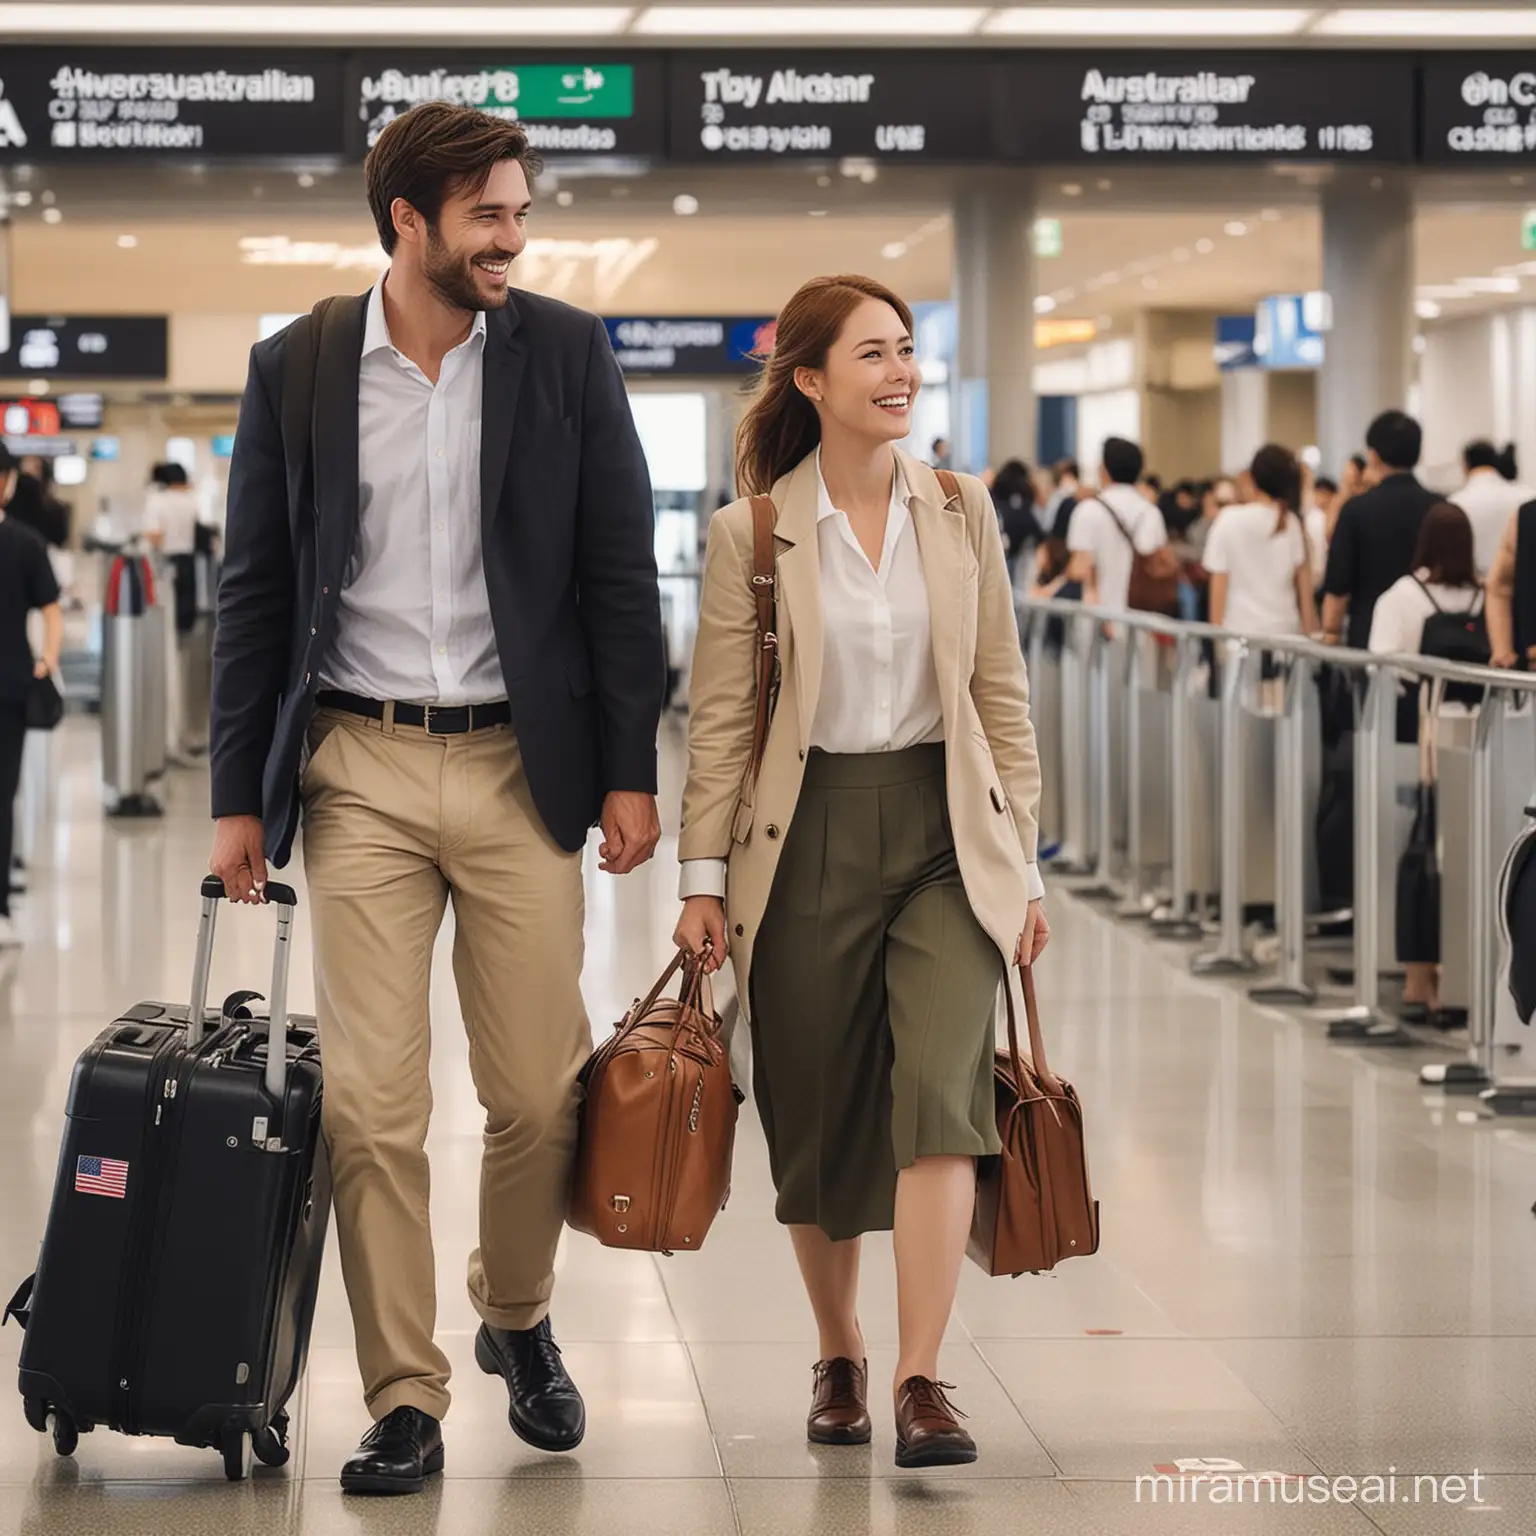 Generate an image of a man and a woman at Tokyo Airport, dragging his luggage and smiling. Note the man is an American and woman is Australian. The airport should look exactly like Tokyo Airport and should have Welcome to Tokyo written 